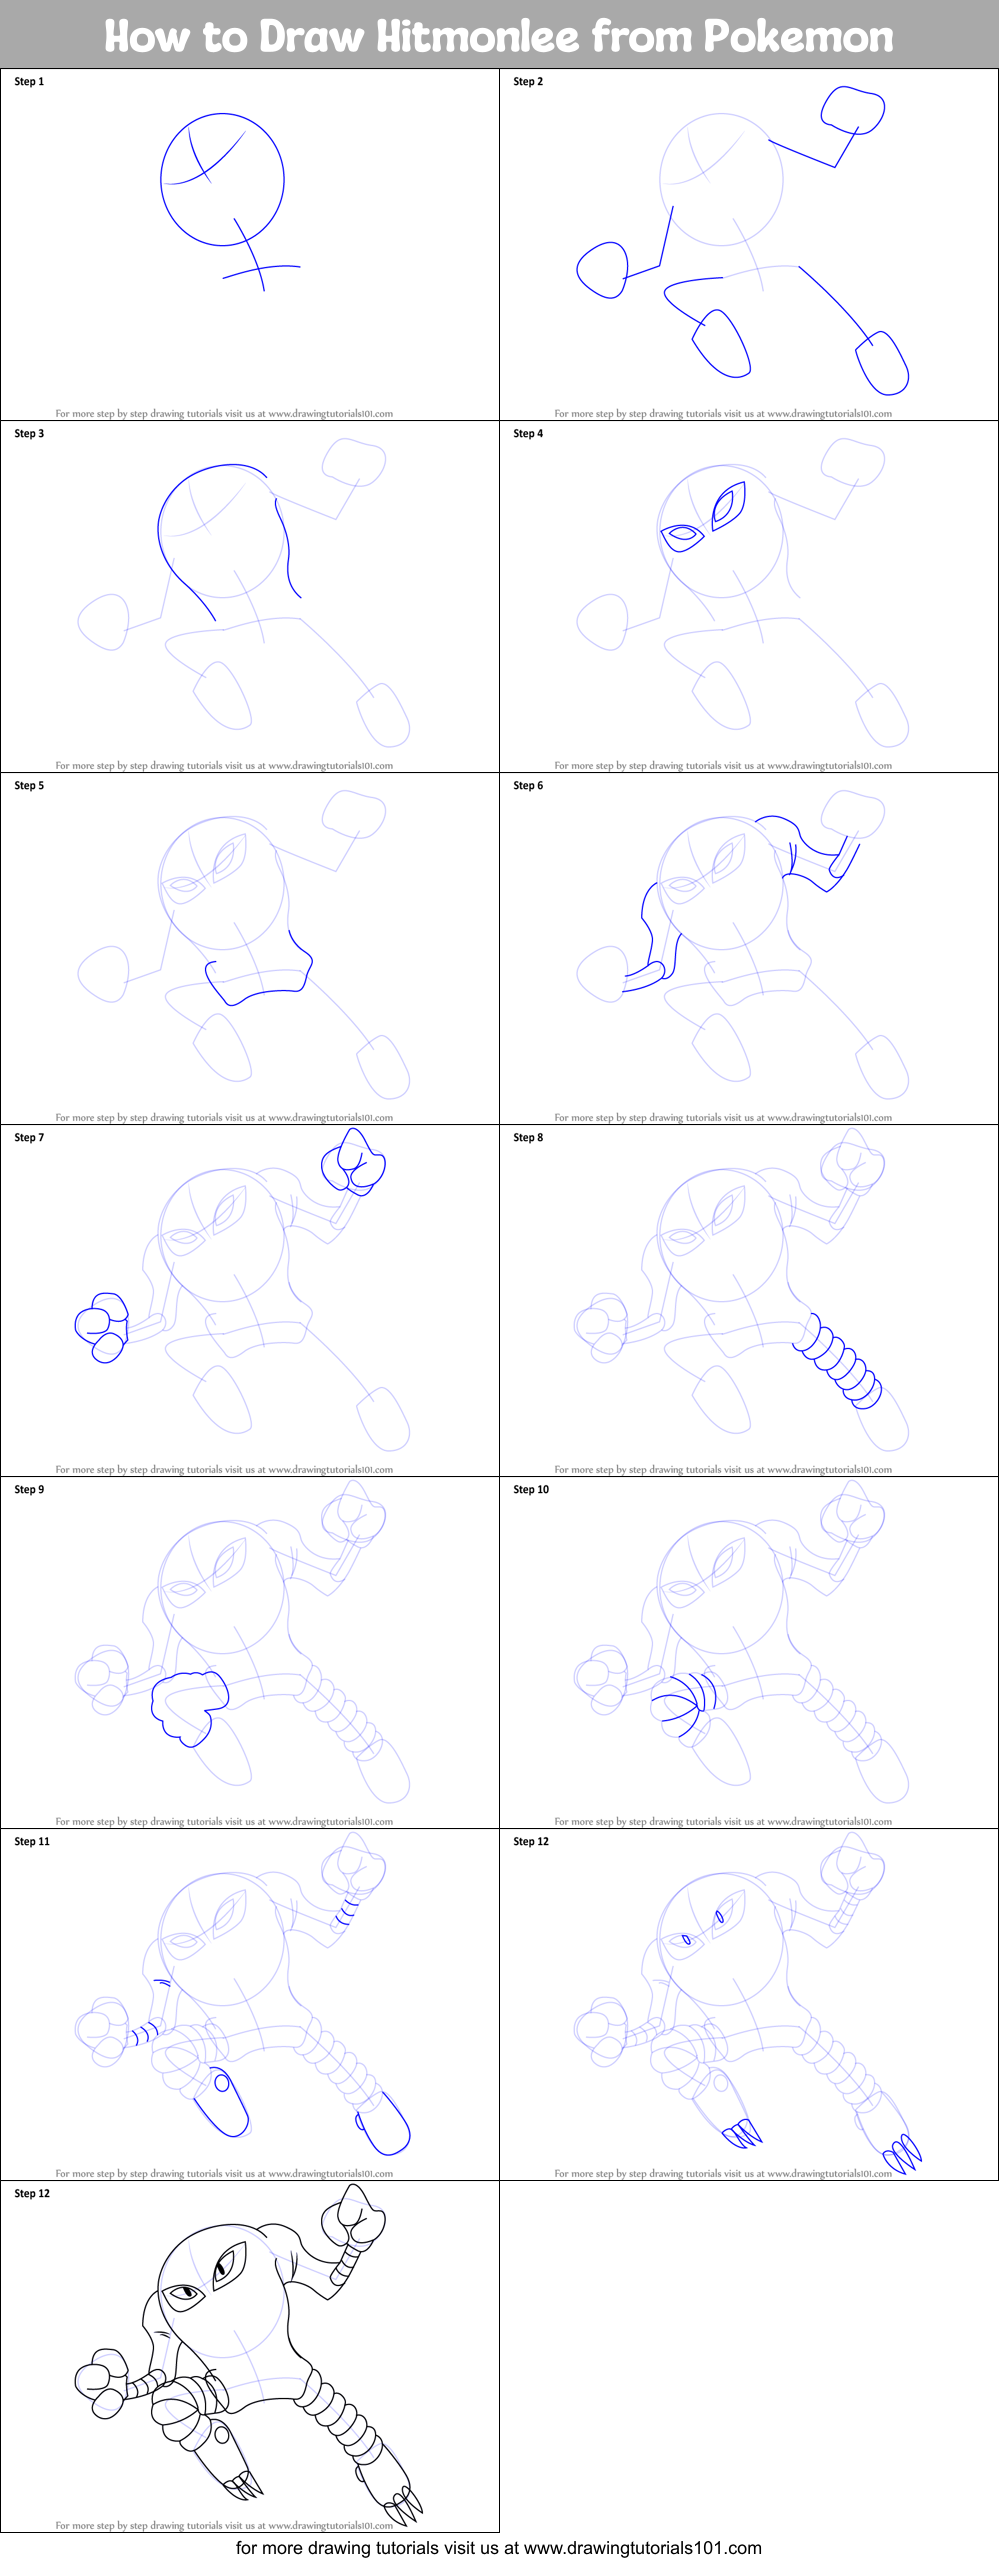 How to Draw Hitmonlee from Pokemon (Pokemon) Step by Step ...